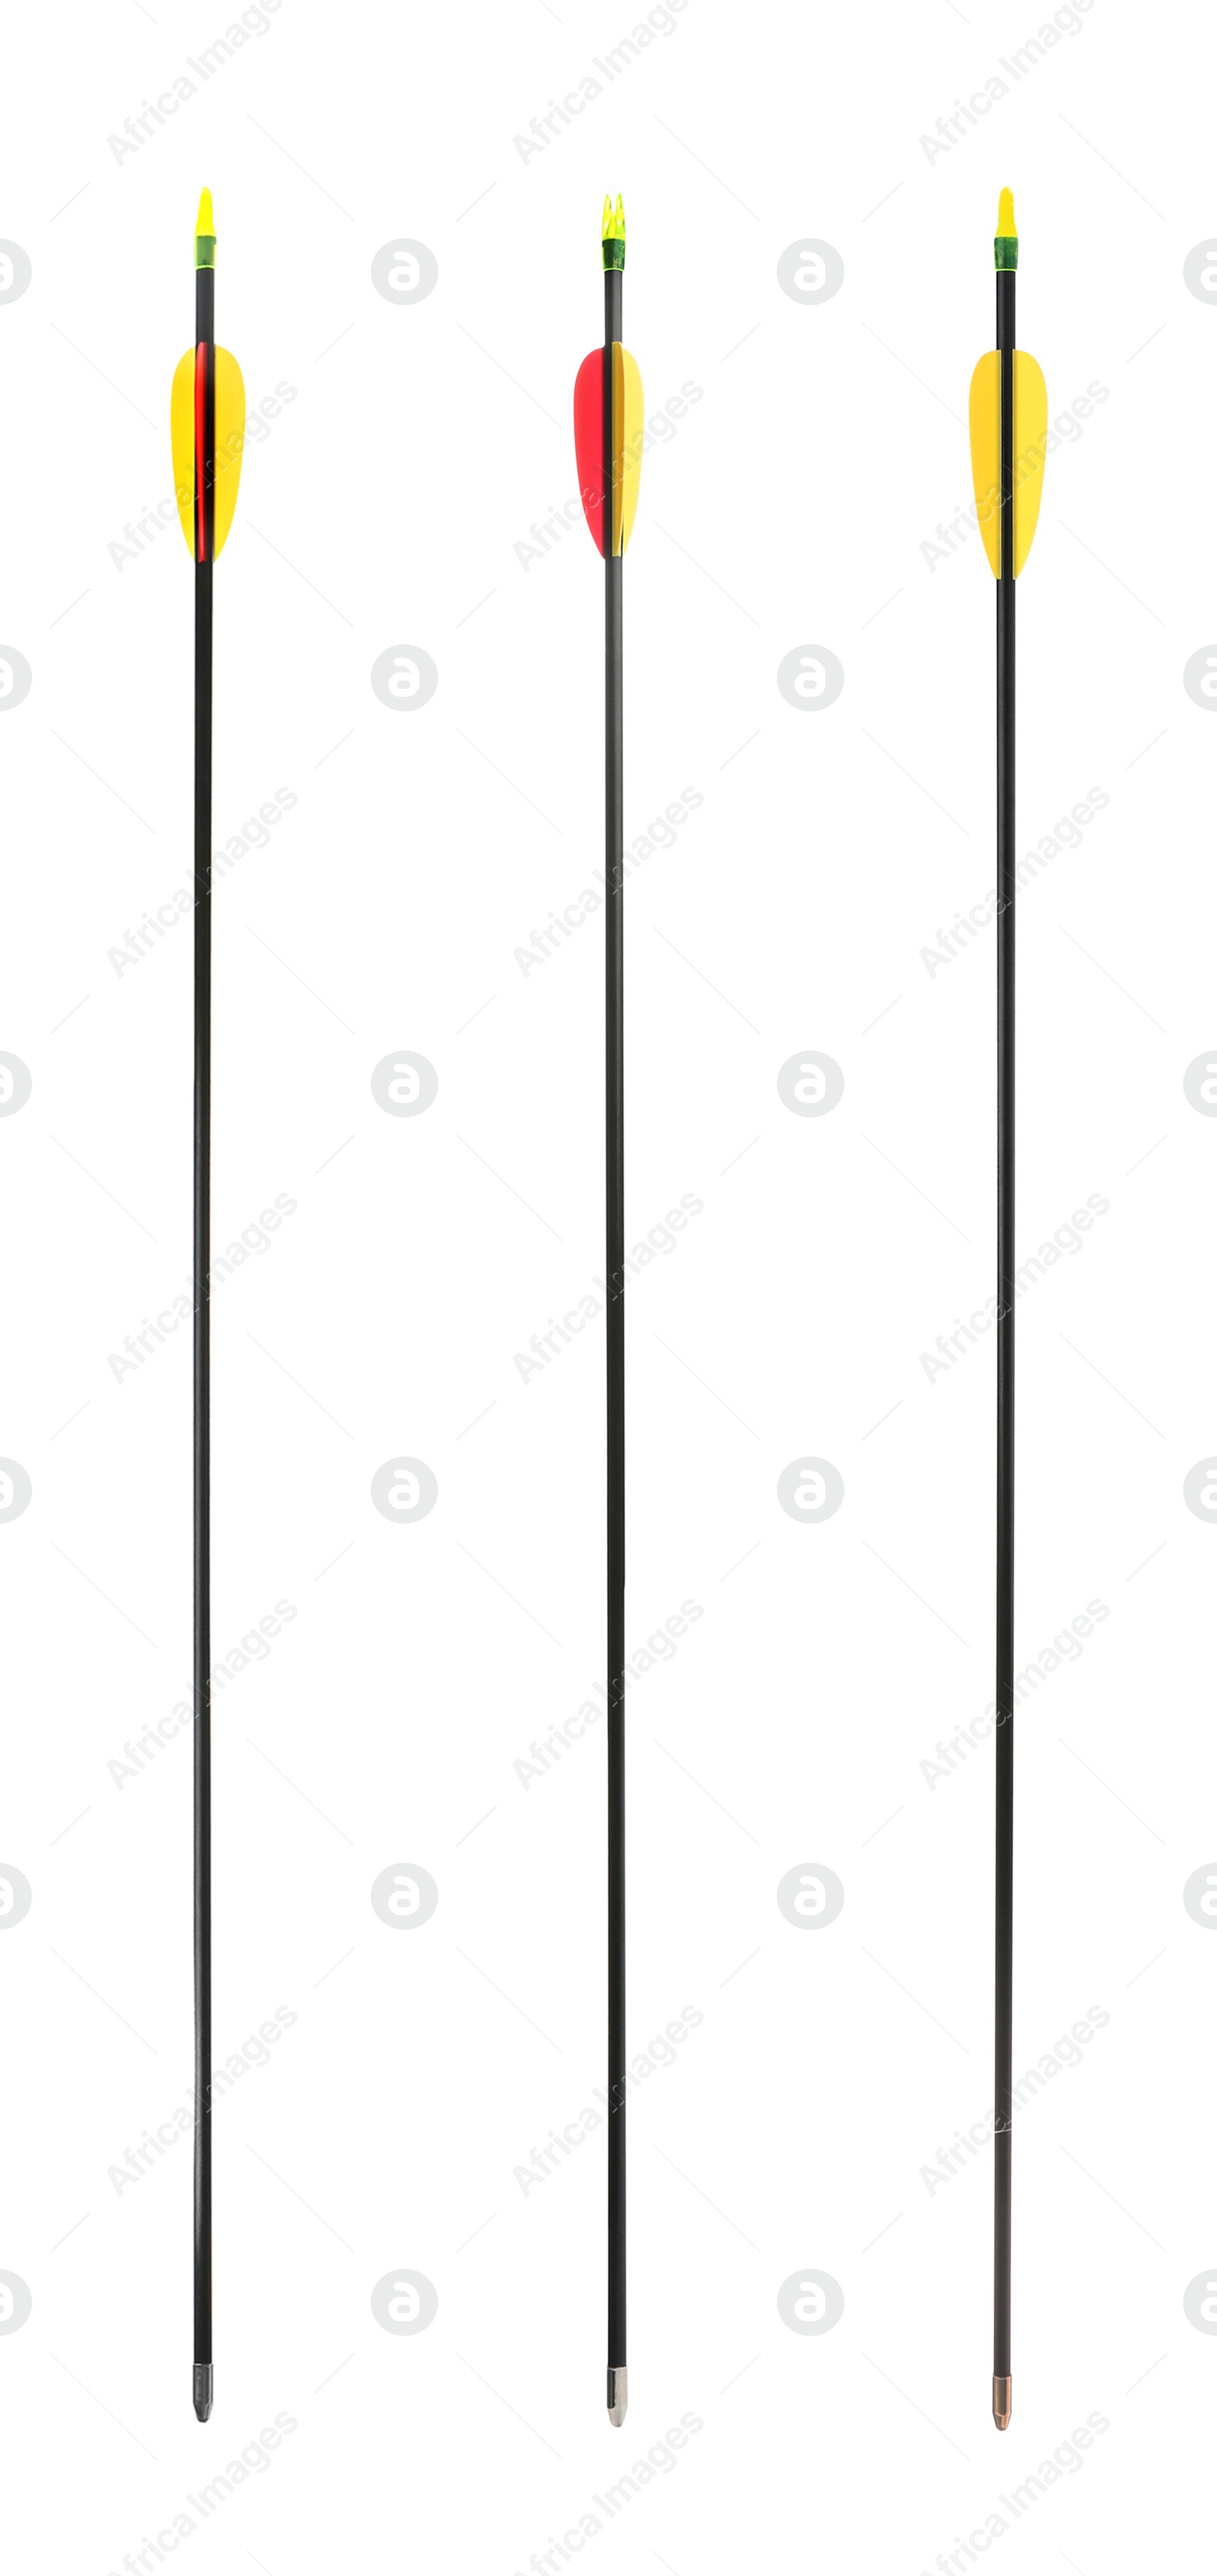 Image of Set with arrows on white background. Vertical banner design 